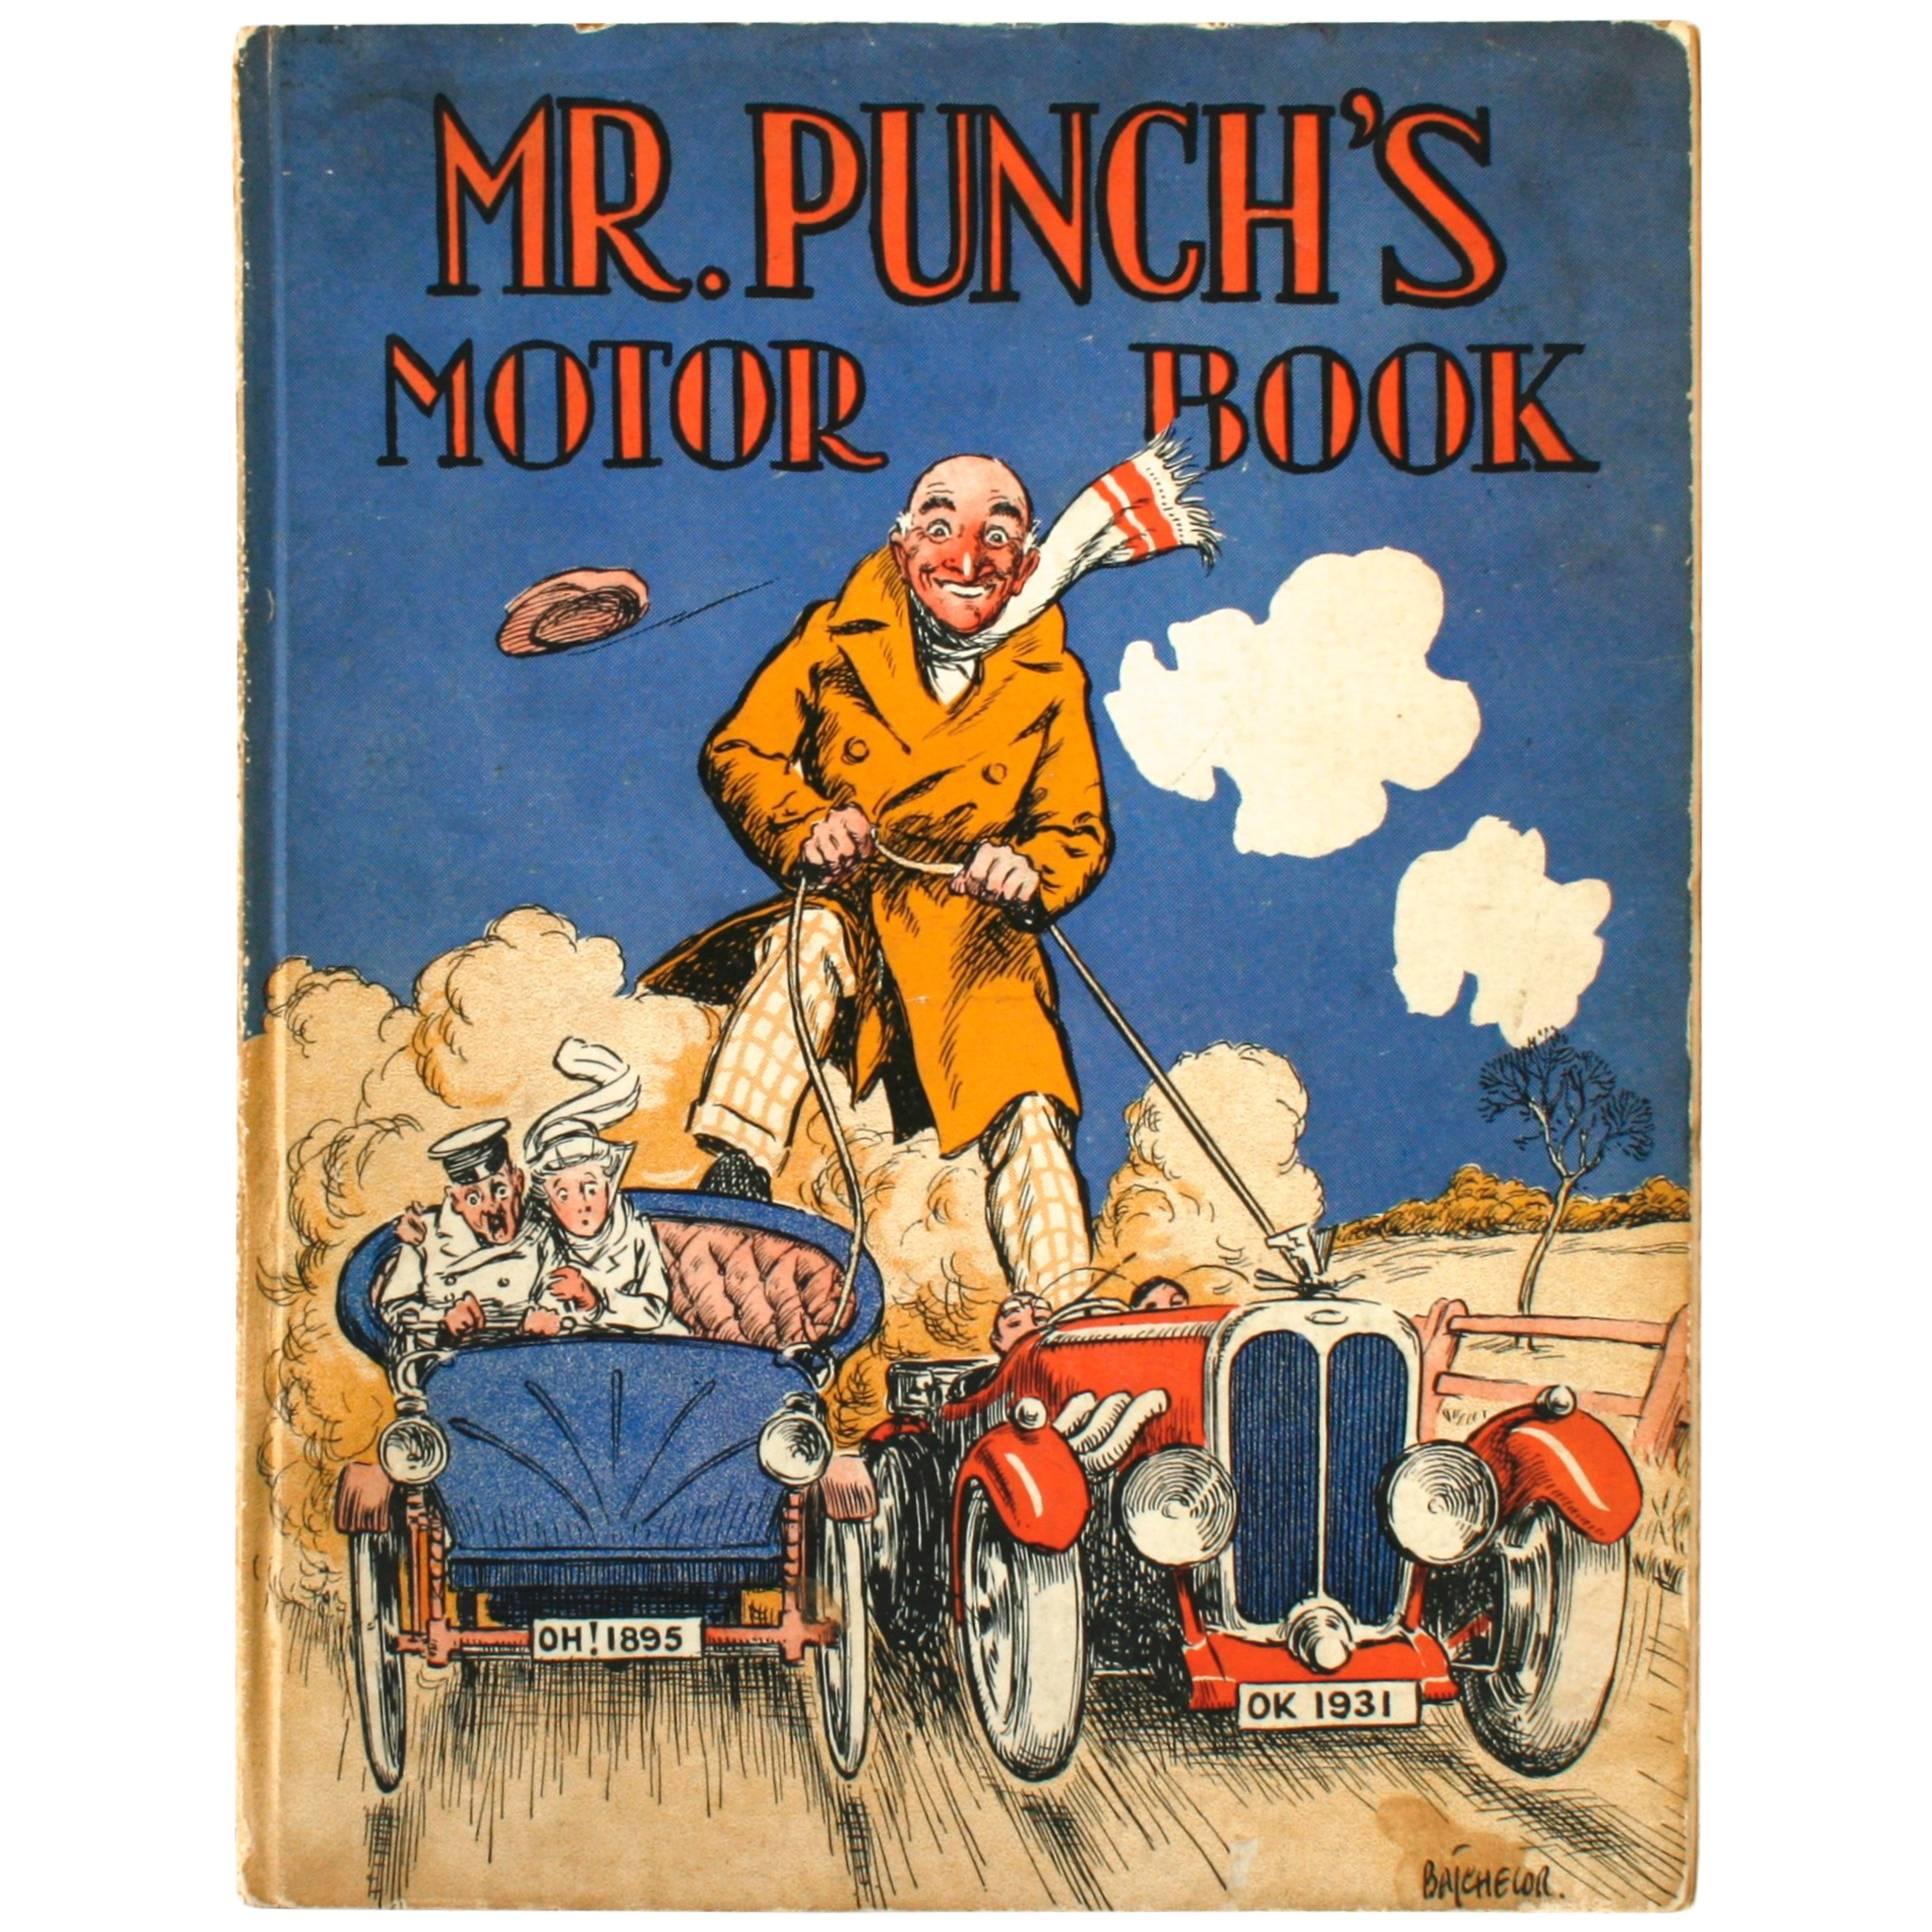 Mr. Punch's Motor Book, First Edition